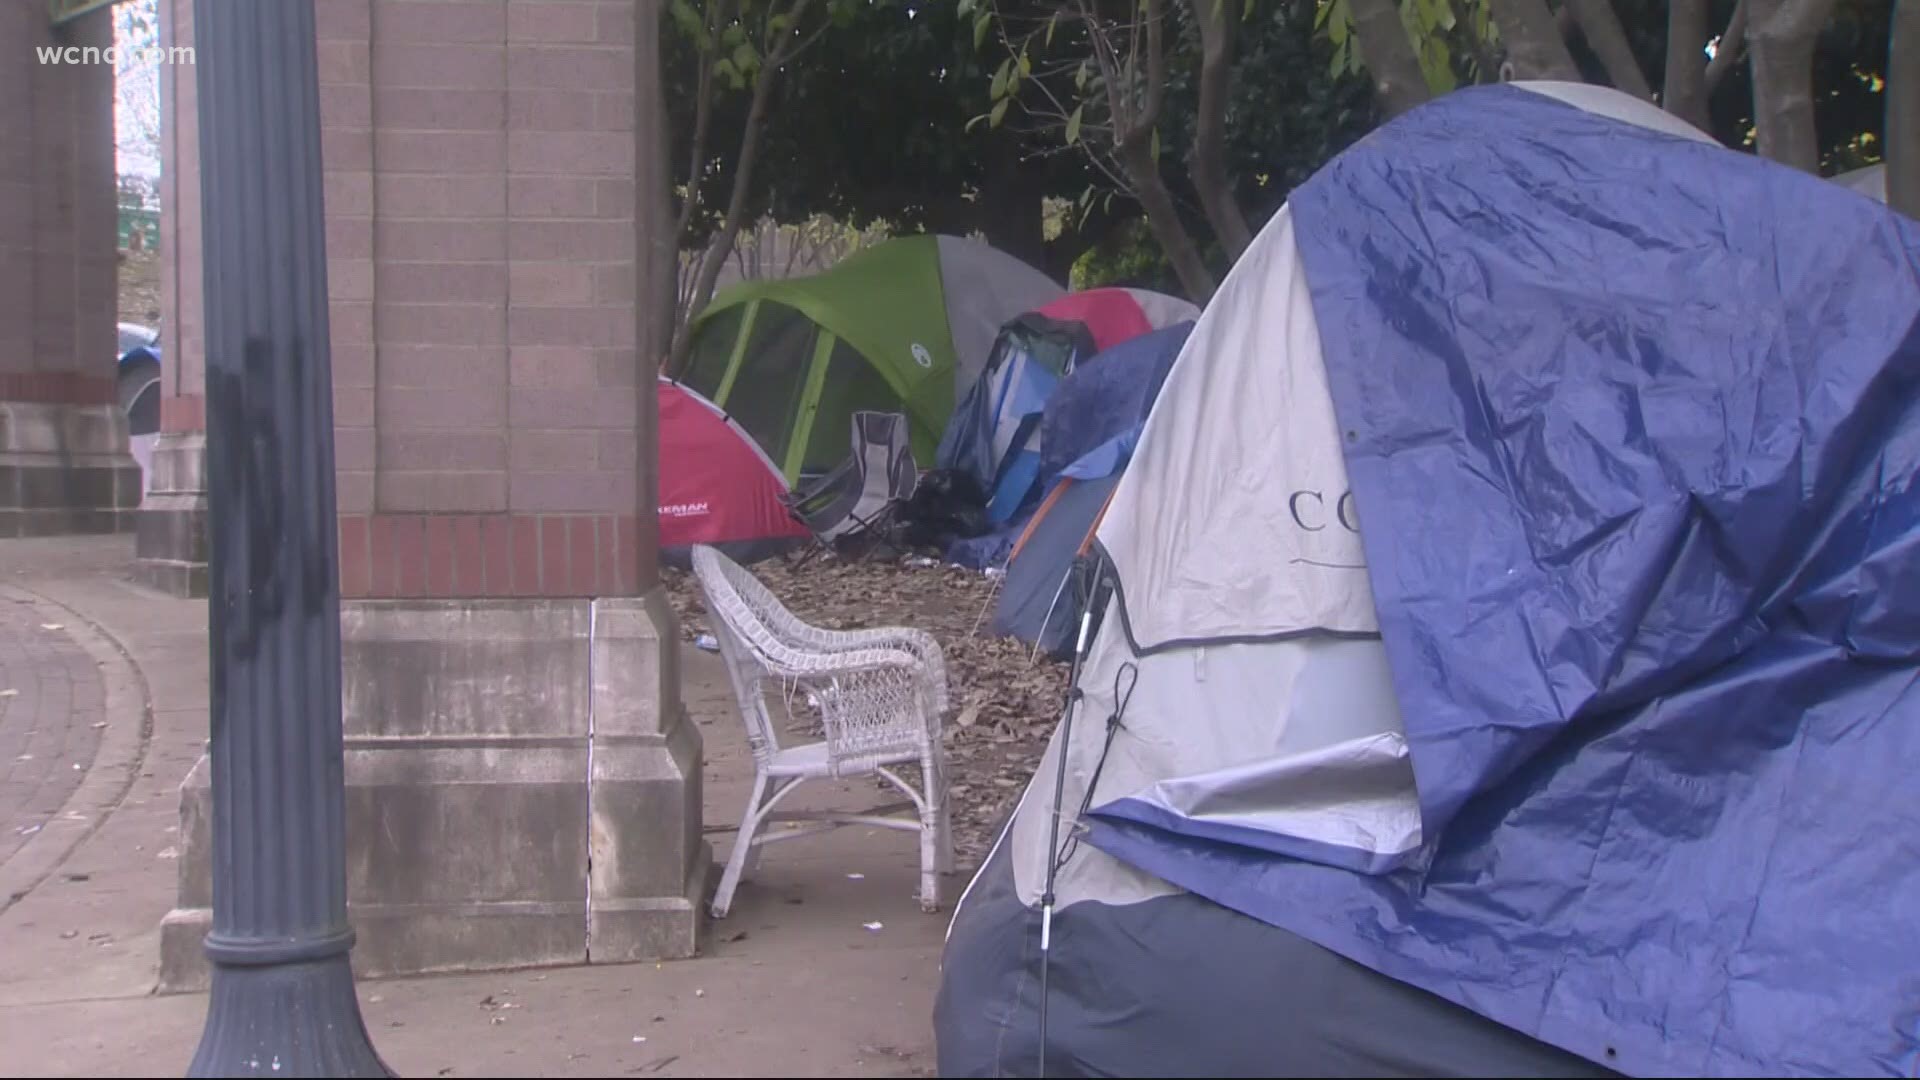 Charlotte tent city residents have one day to vacate property | wcnc.com